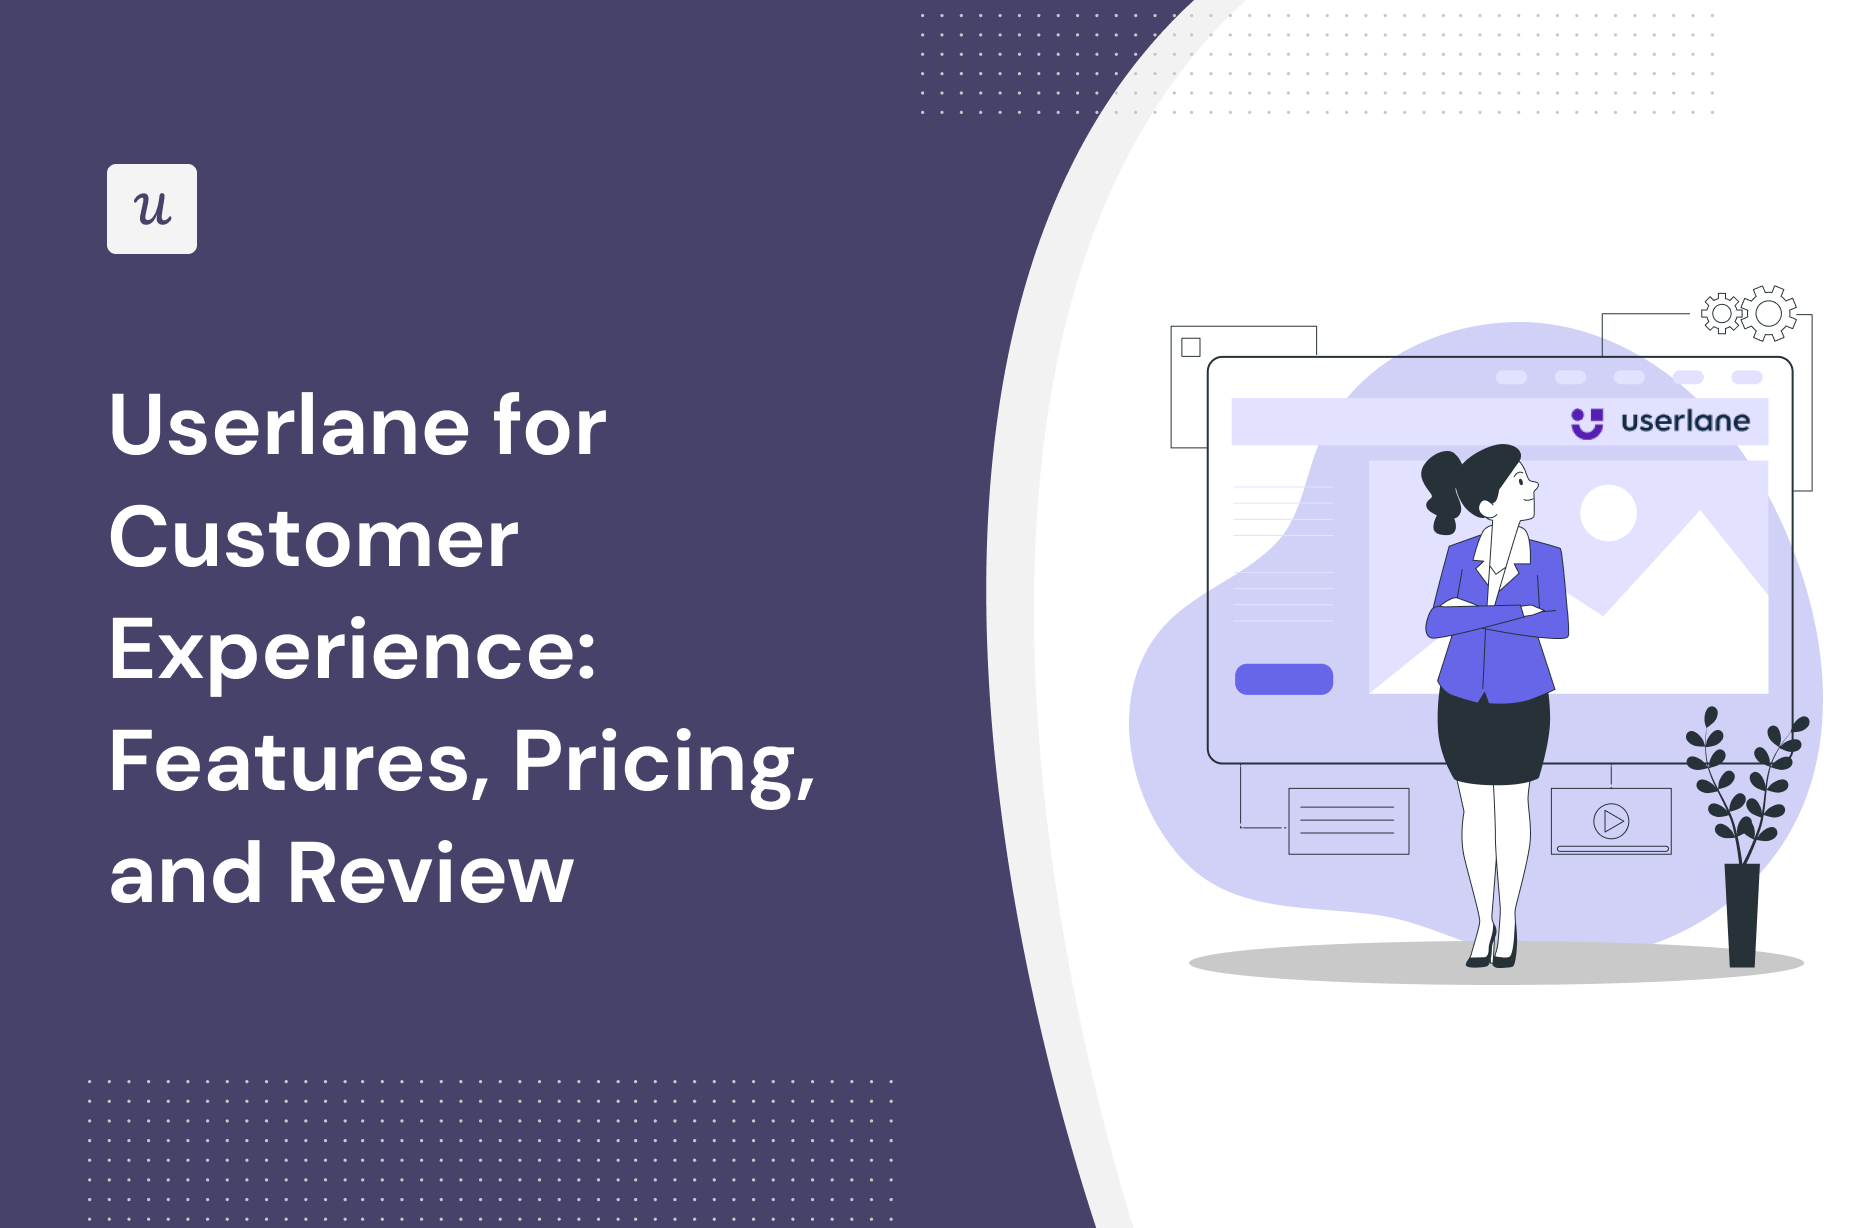 Userlane for Customer Experience: Features, Pricing, and Review